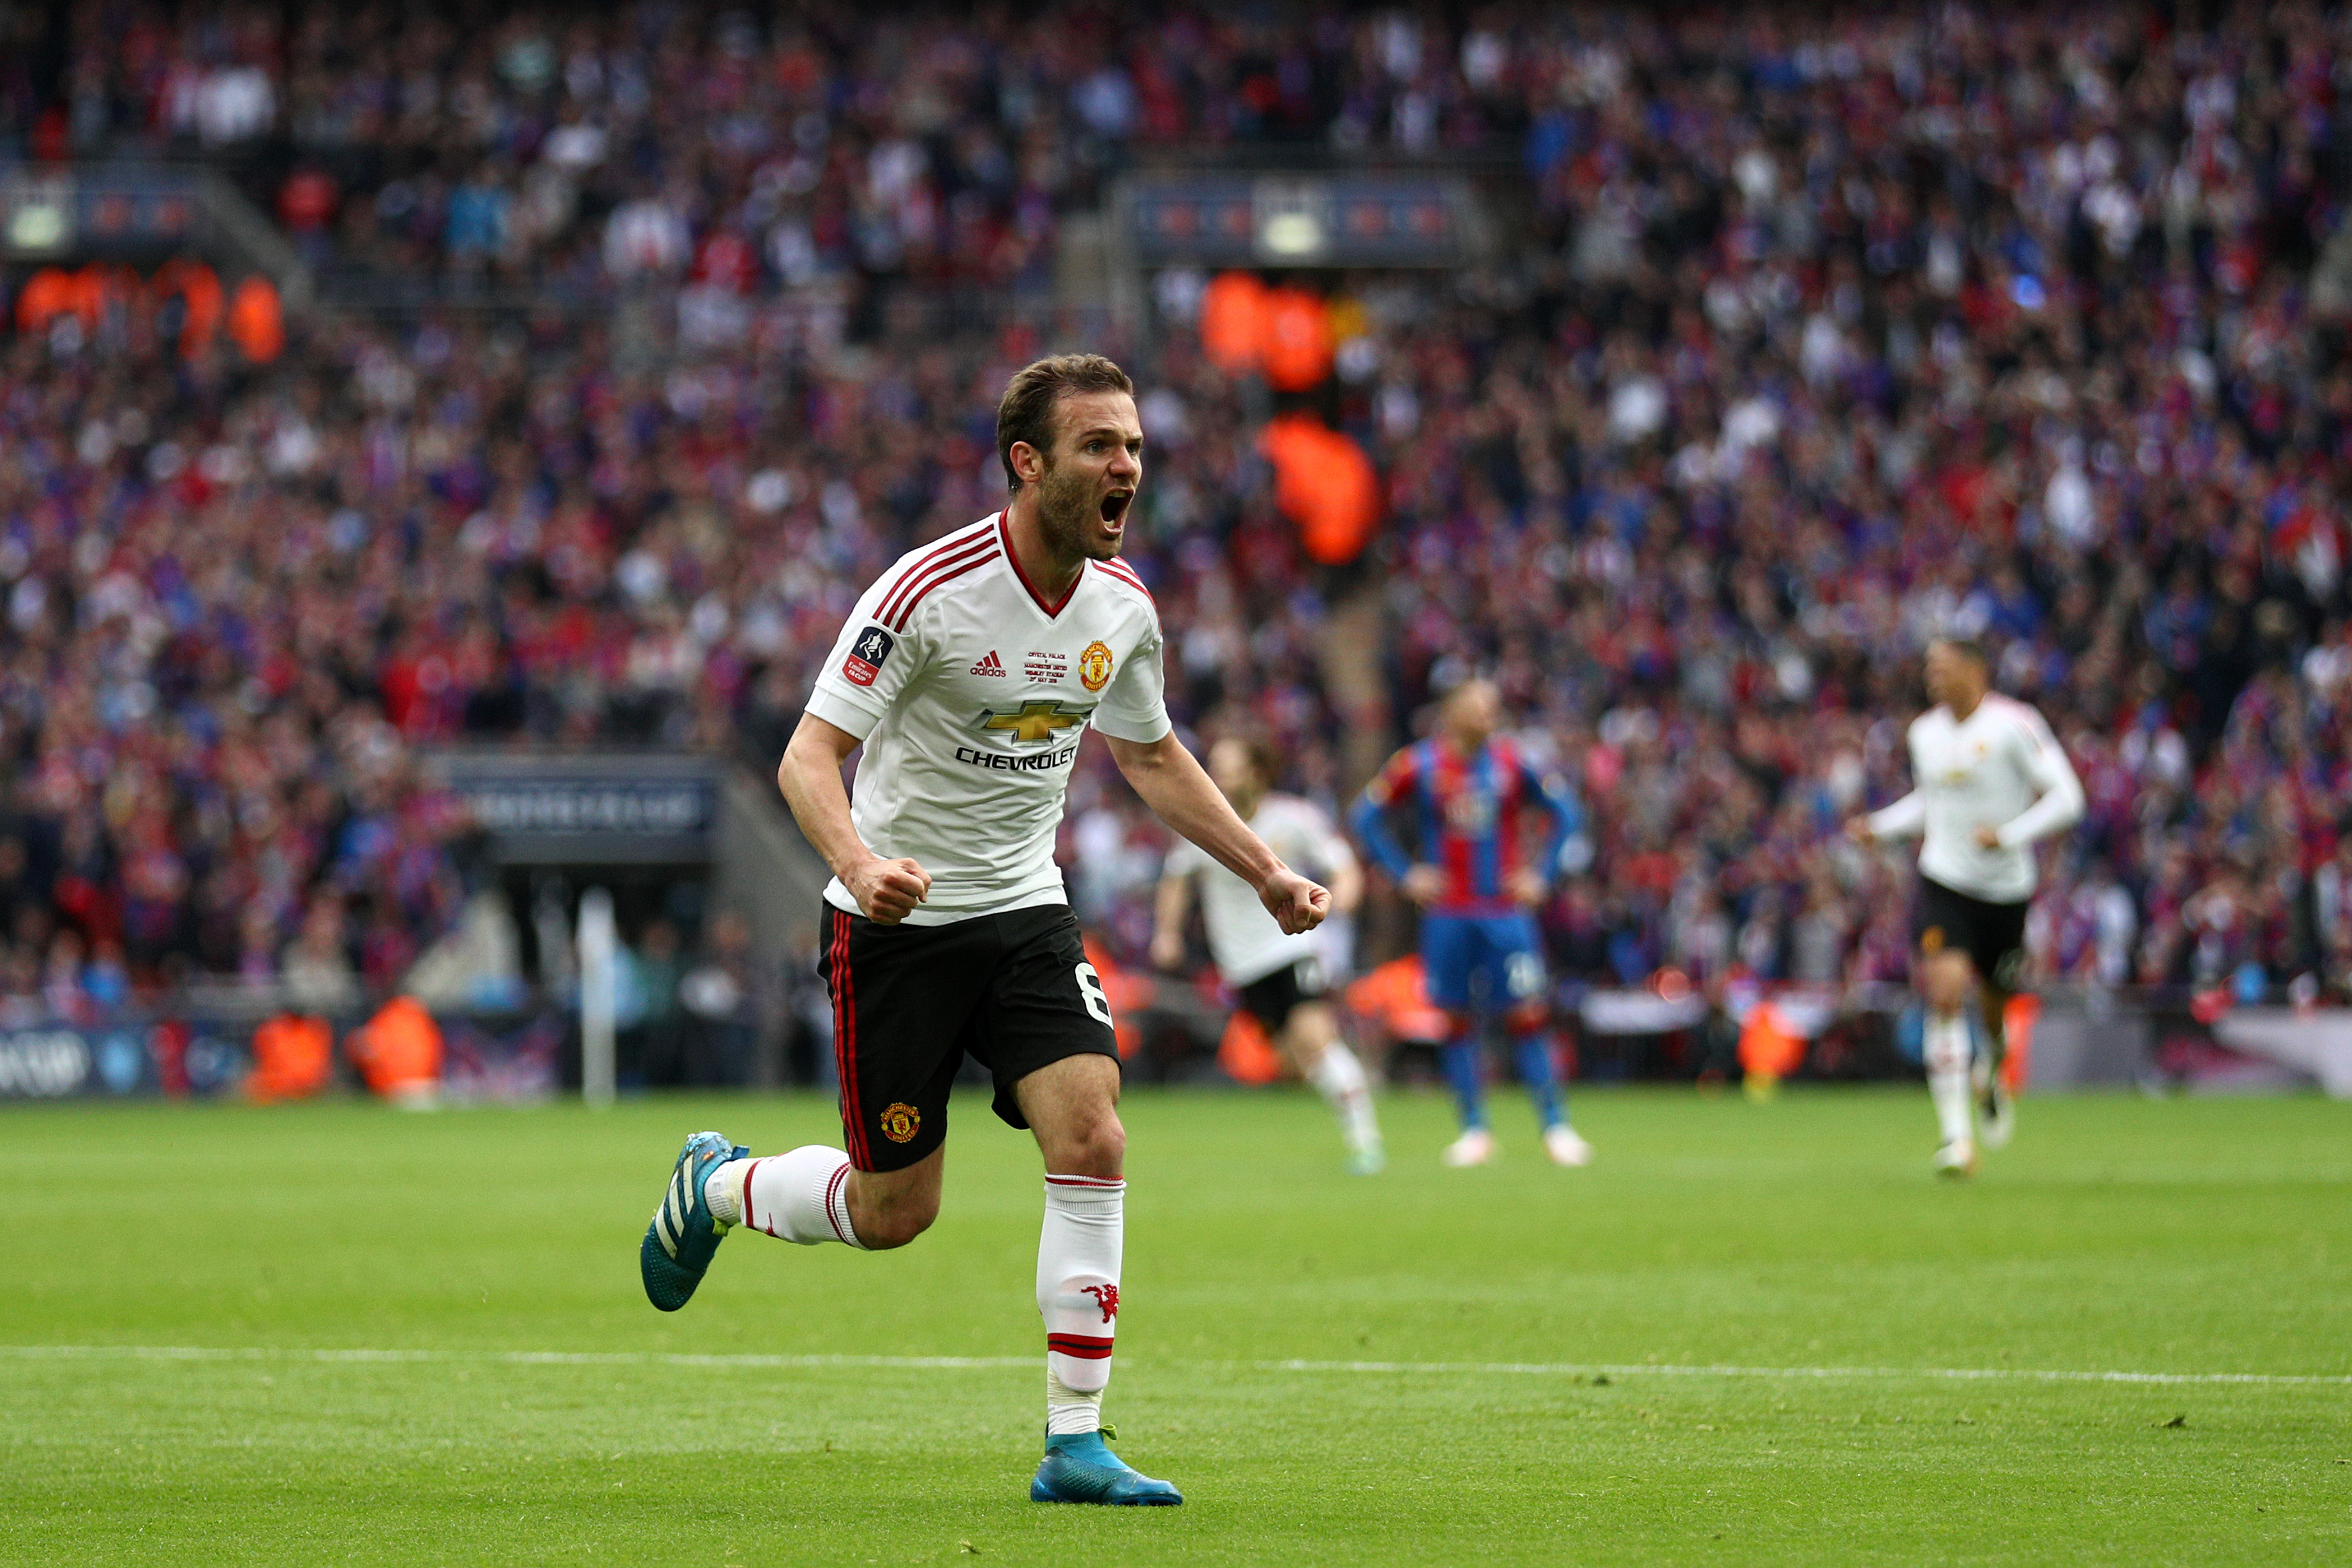 LONDON, ENGLAND - MAY 21:  Juan Mata of Manchester United (L) celebrates as he scores their first goal during The Emirates FA Cup Final match between Manchester United and Crystal Palace at Wembley Stadium on May 21, 2016 in London, England.  (Photo by Paul Gilham/Getty Images)